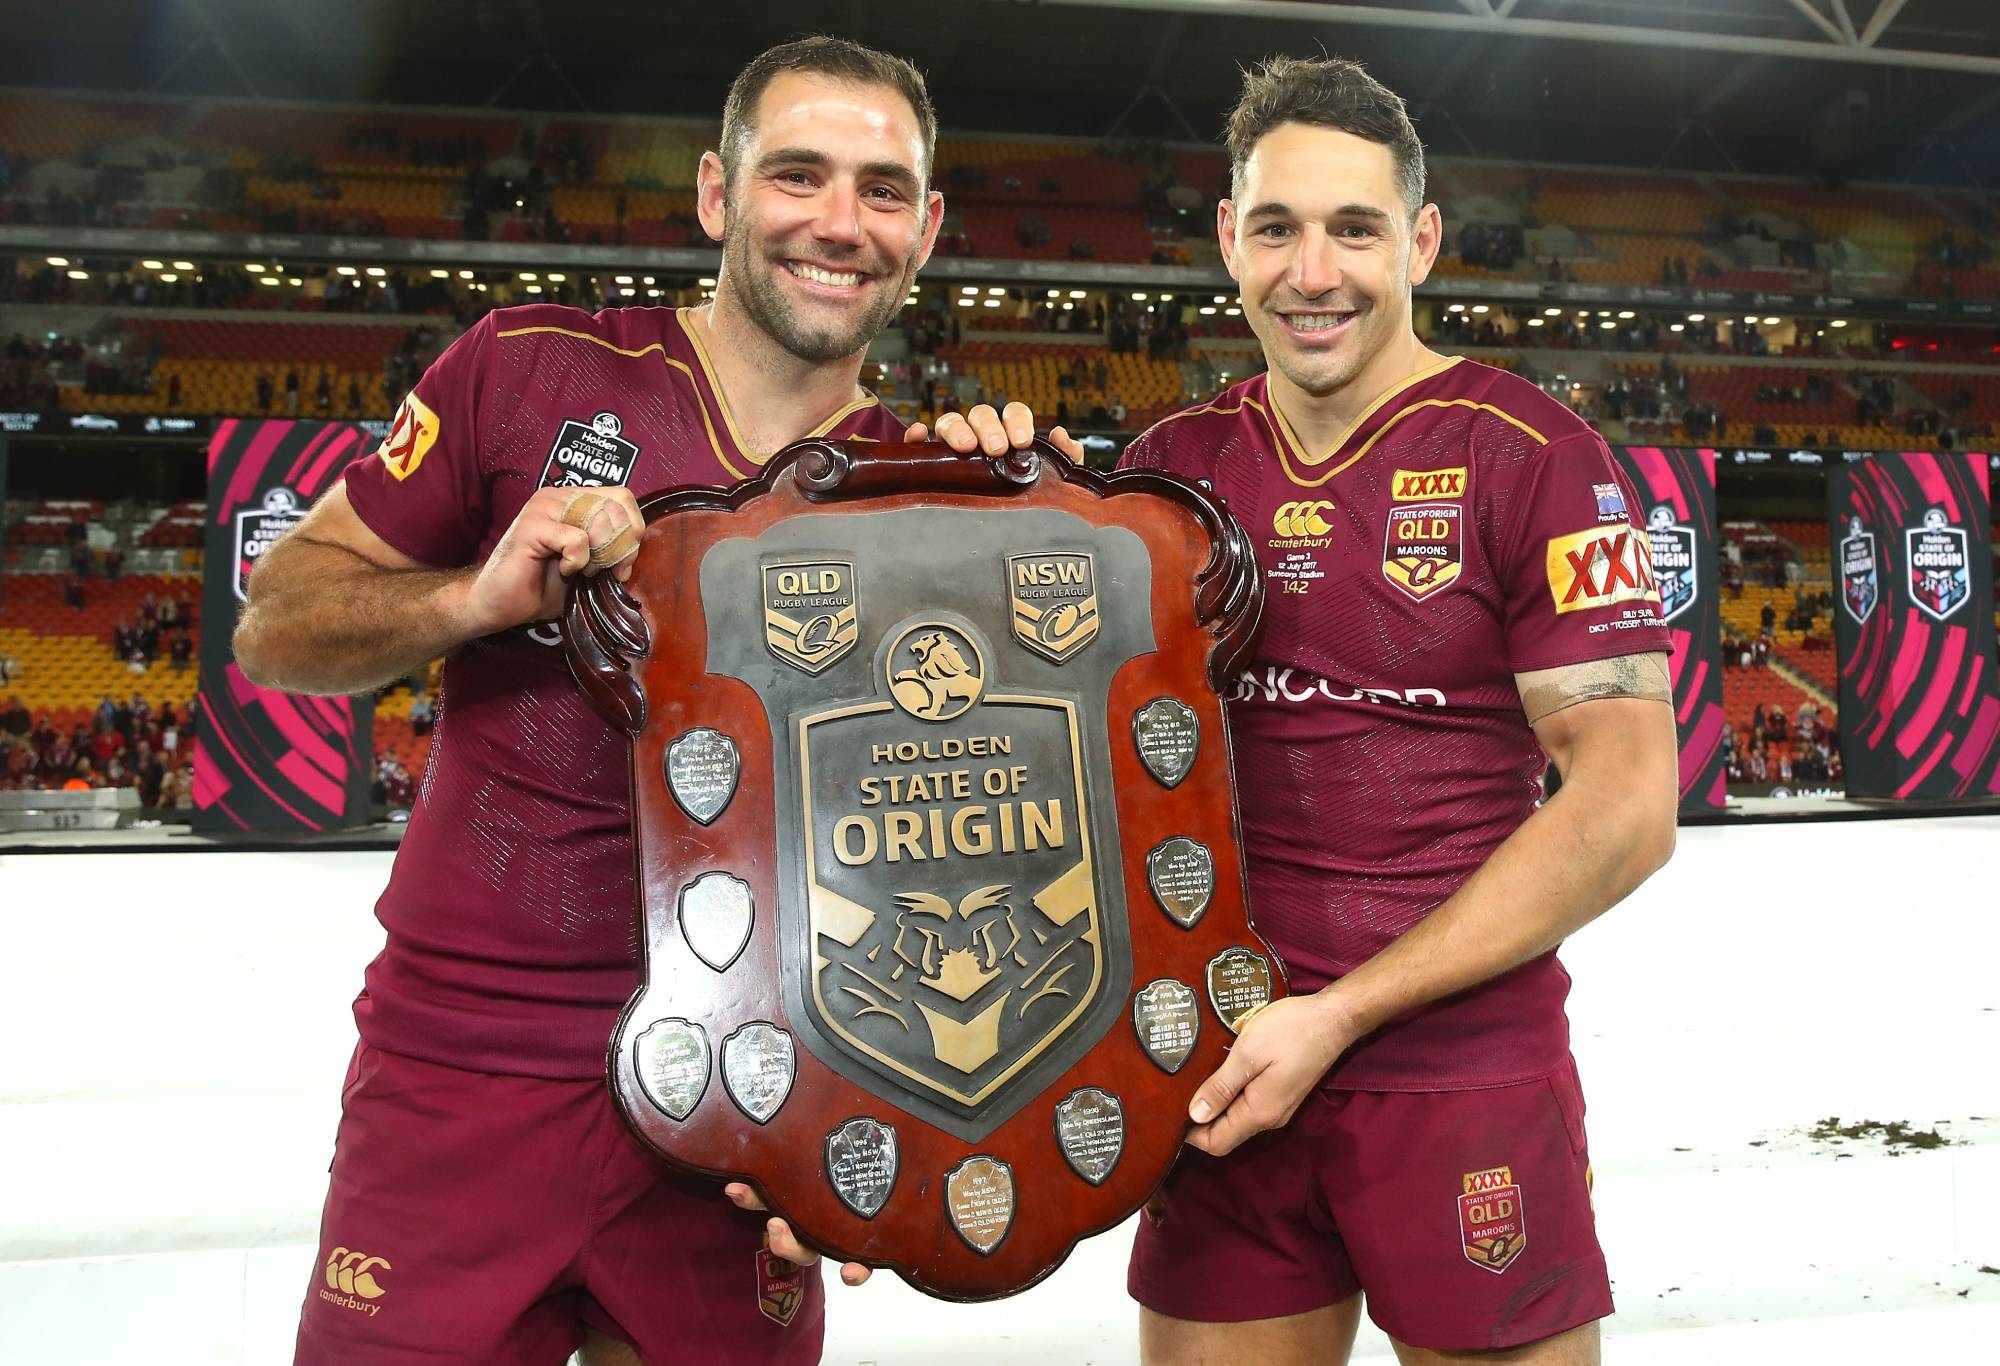 BRISBANE, AUSTRALIA - JULY 12: Cameron Smith and Billy Slater of the Maroons pose with the shield as they celebrate victory during game three of the State Of Origin series between the Queensland Maroons and the New South Wales Blues at Suncorp Stadium on July 12, 2017 in Brisbane, Australia. (Photo by Mark Kolbe/Getty Images)